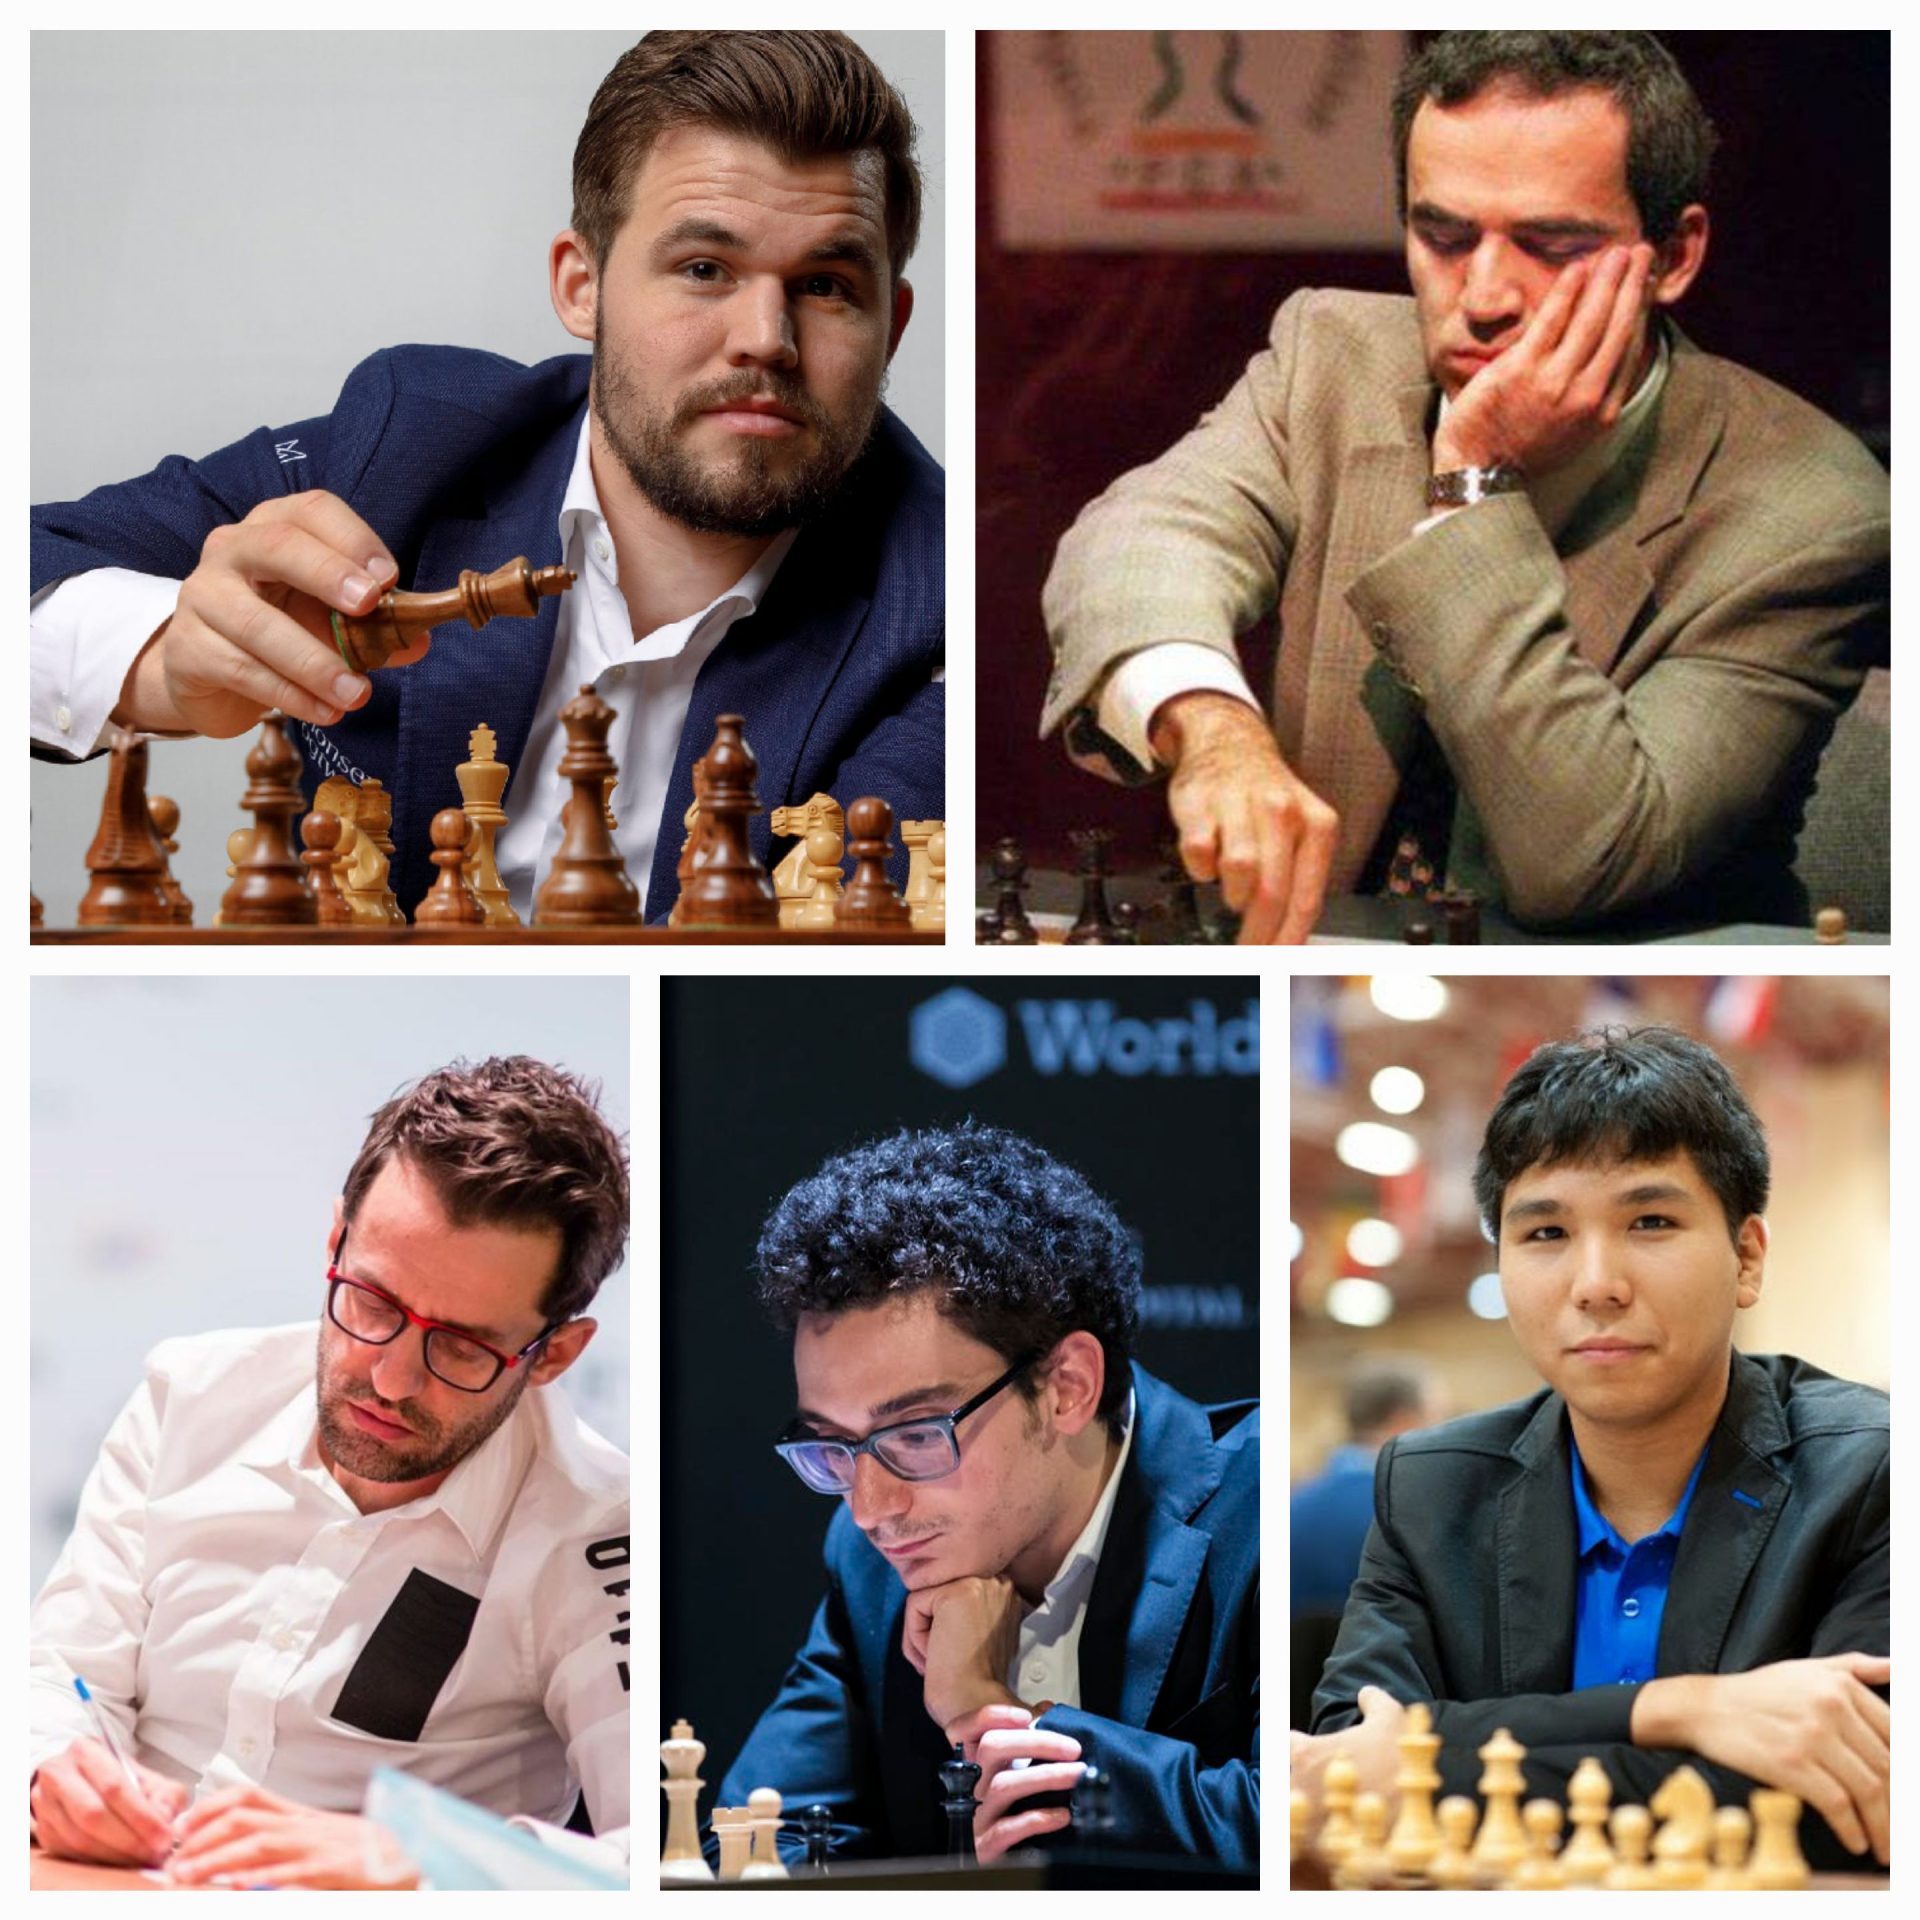 Top Chess Players With Highest Chess Ratings: From Top to Bottom - Magnus Carlsen, Garry Kasparov, Levon Aronian, Fabiano Caruana, Wesley So